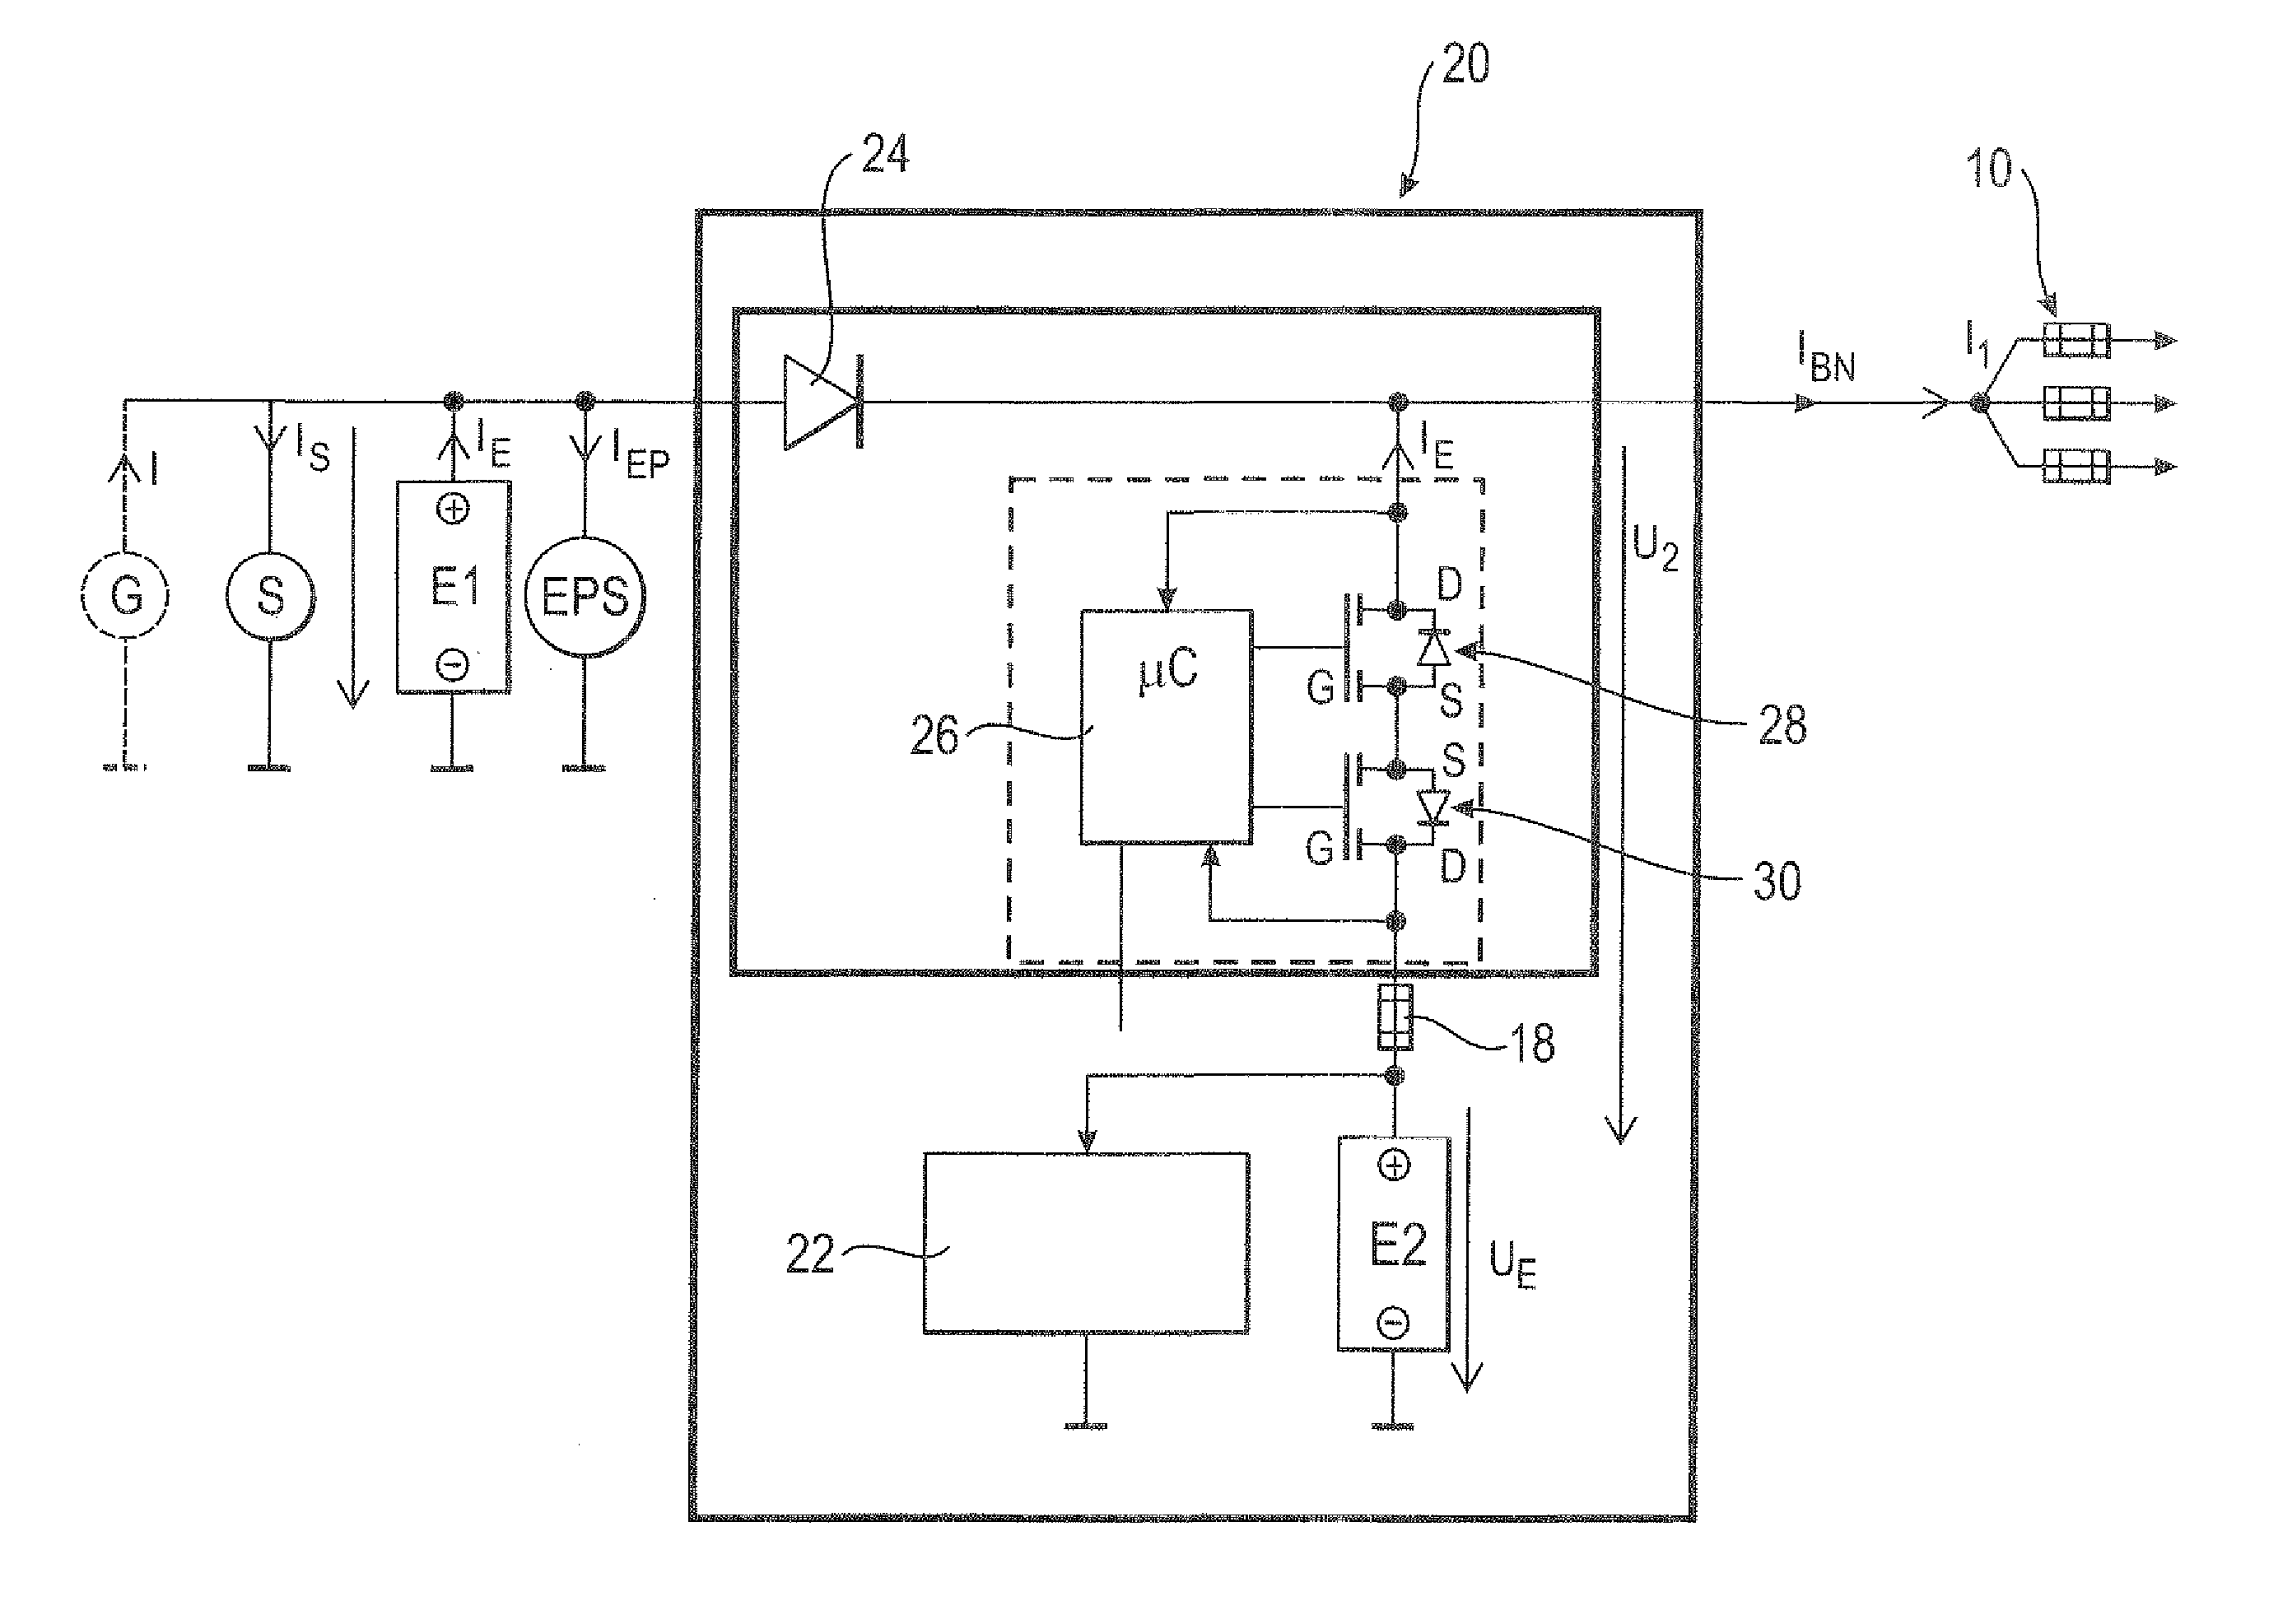 Circuit for voltage stabilization in an onboard power supply